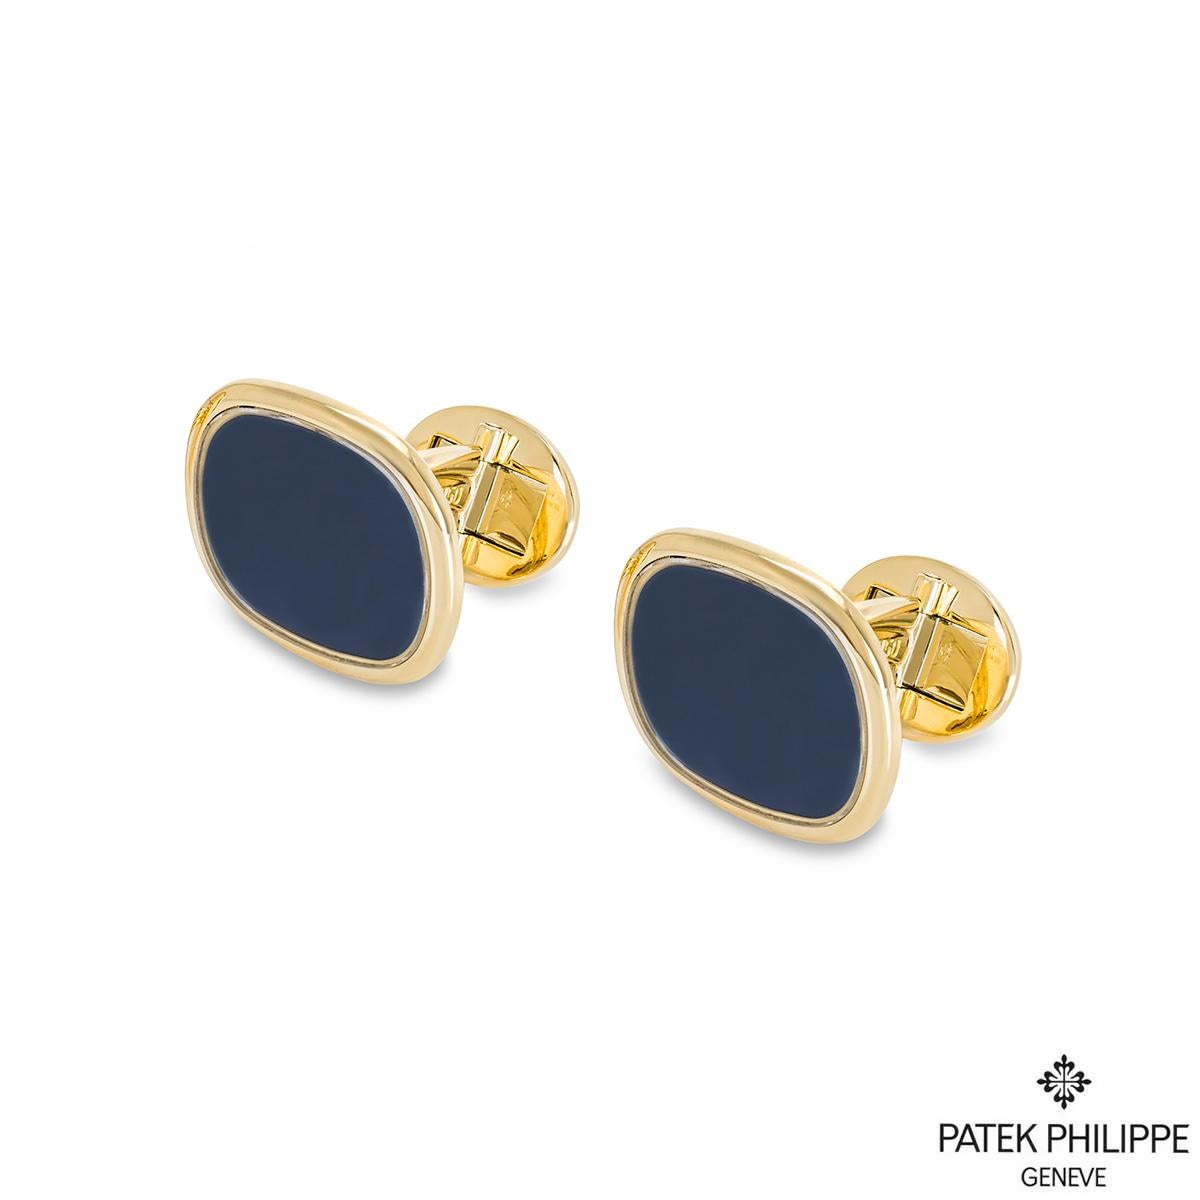 A pair of 18k yellow gold large Ellipse cufflinks by Patek Philippe. The cufflinks are set with a dark blue panel surrounded by a high polish border. The cufflinks measure 2.2cm in width, 1.9cm in height, 2.2cm in depth and have a gross weight of